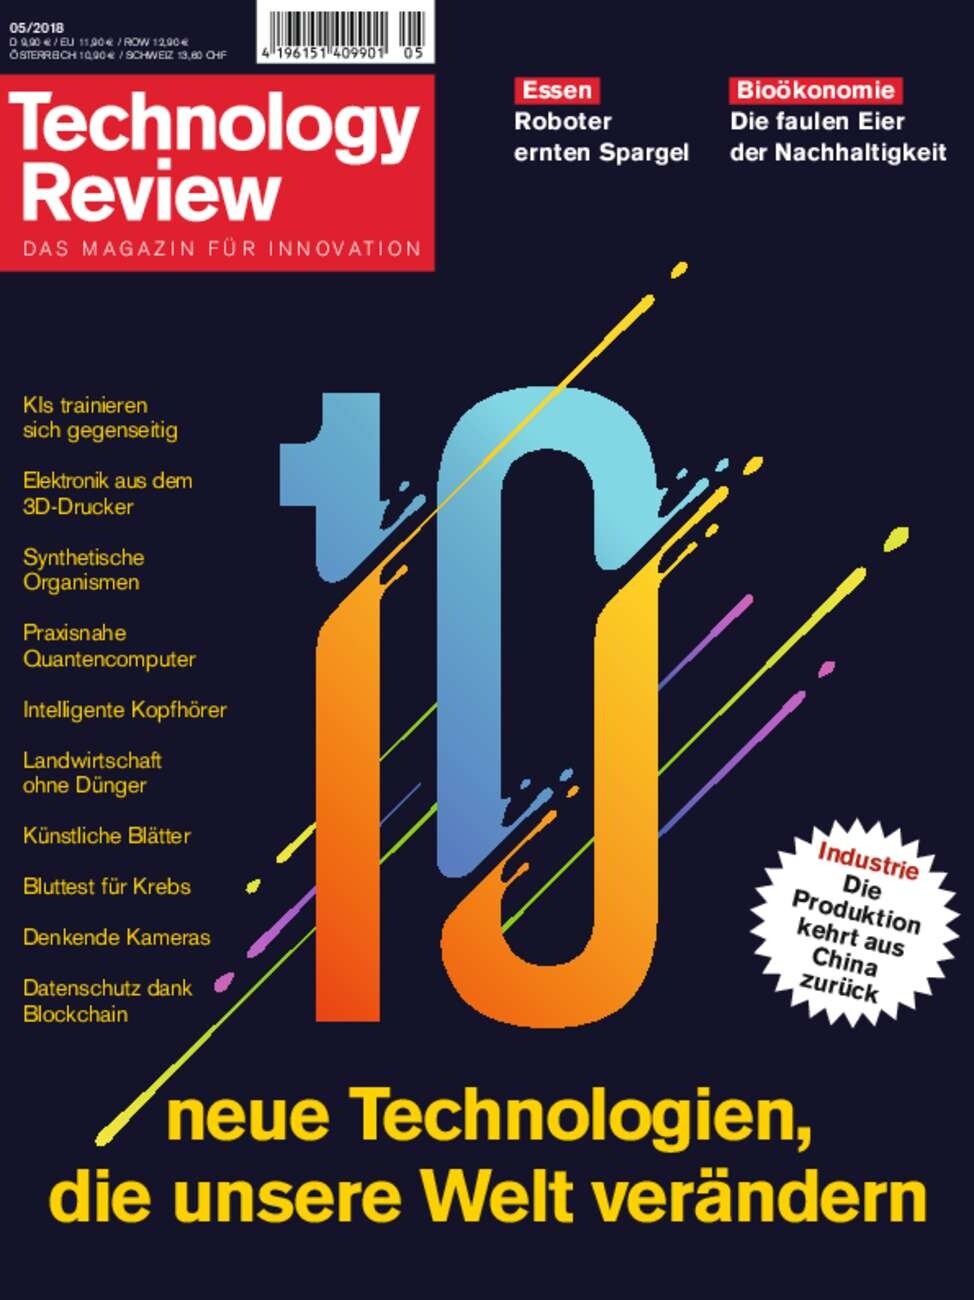 Technology Review 5/2018